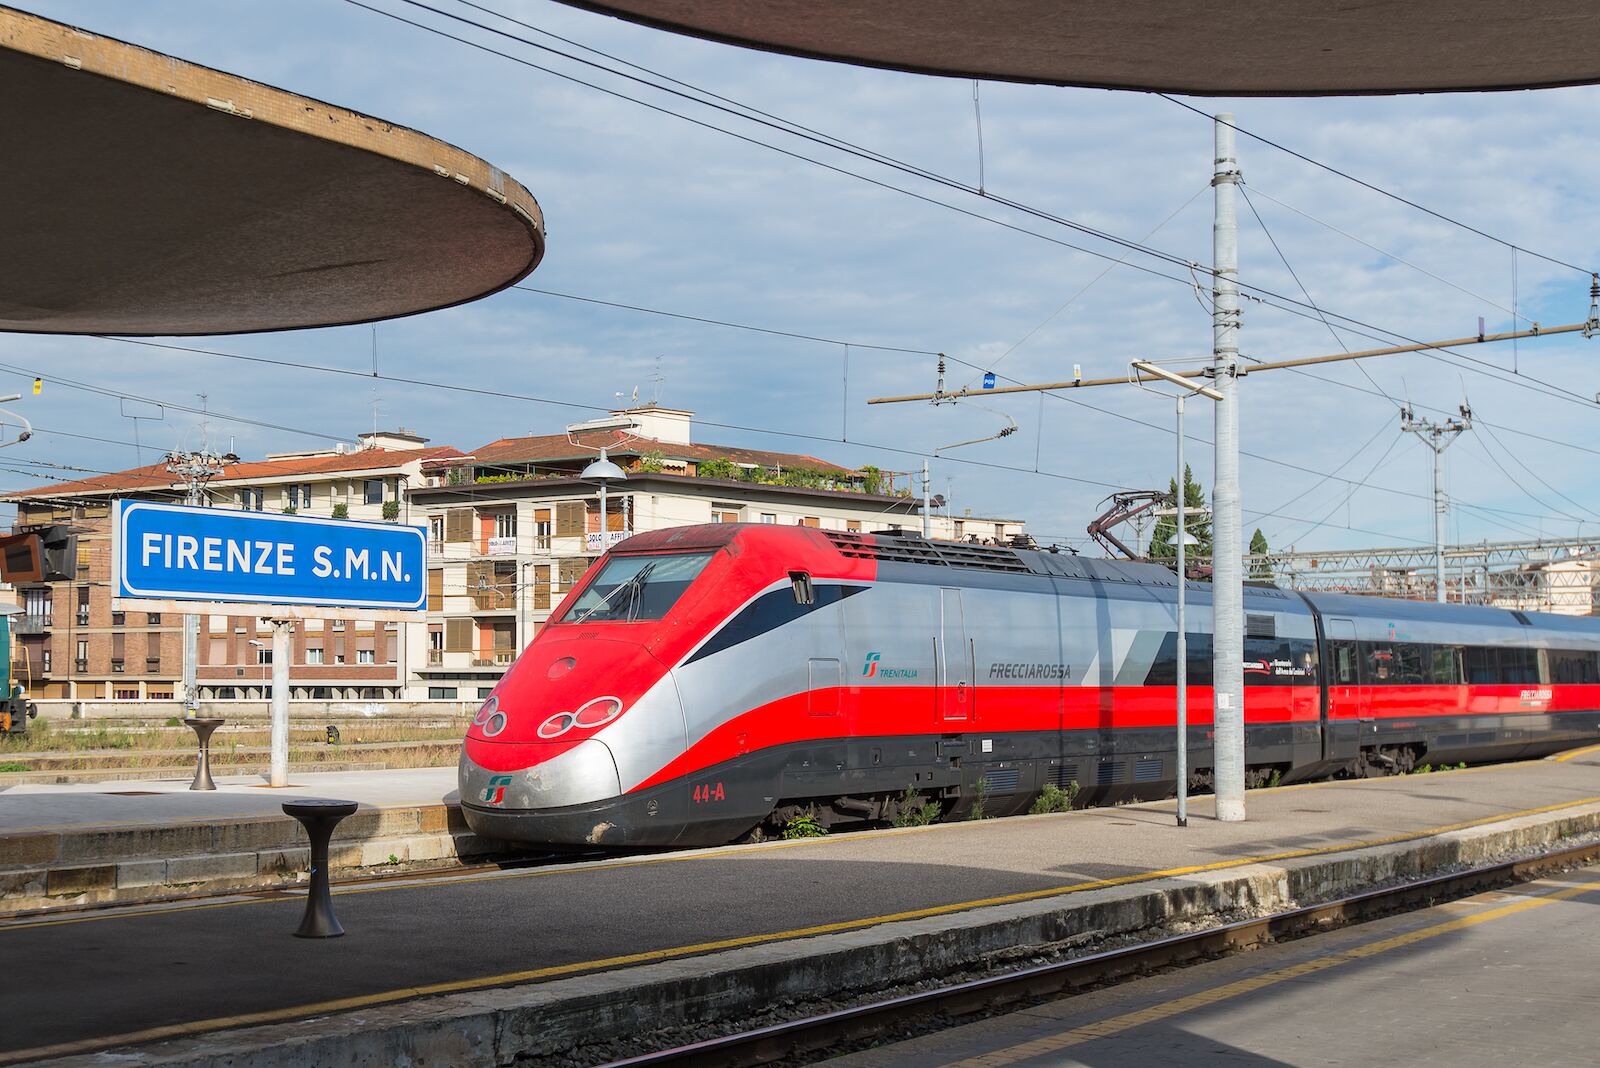 High-speed train from Rome to Florence arriving in Florence SMN train station